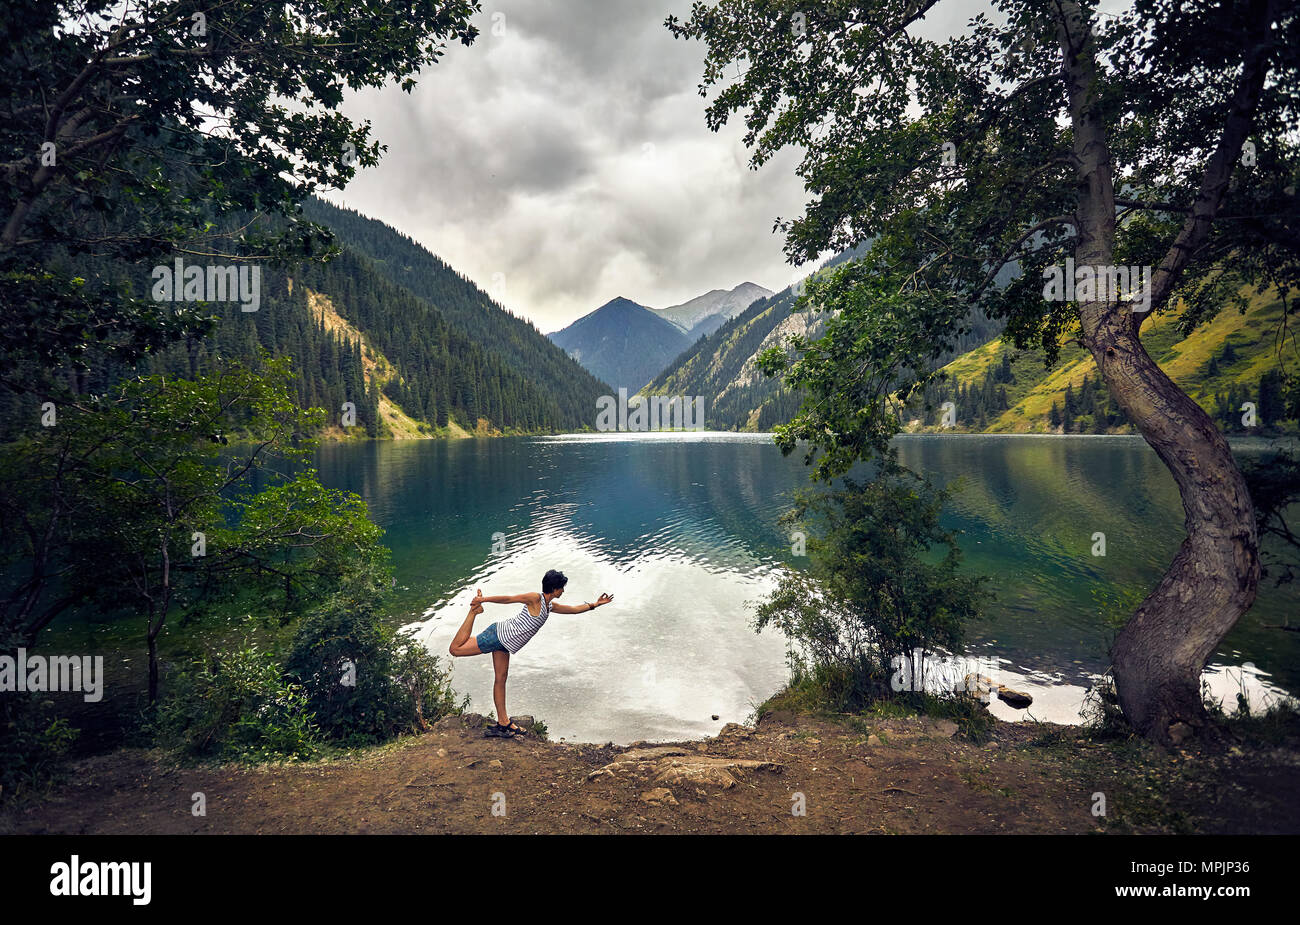 Young woman is practicing yoga balance pose at Mountain Lake with overcast sky background Stock Photo